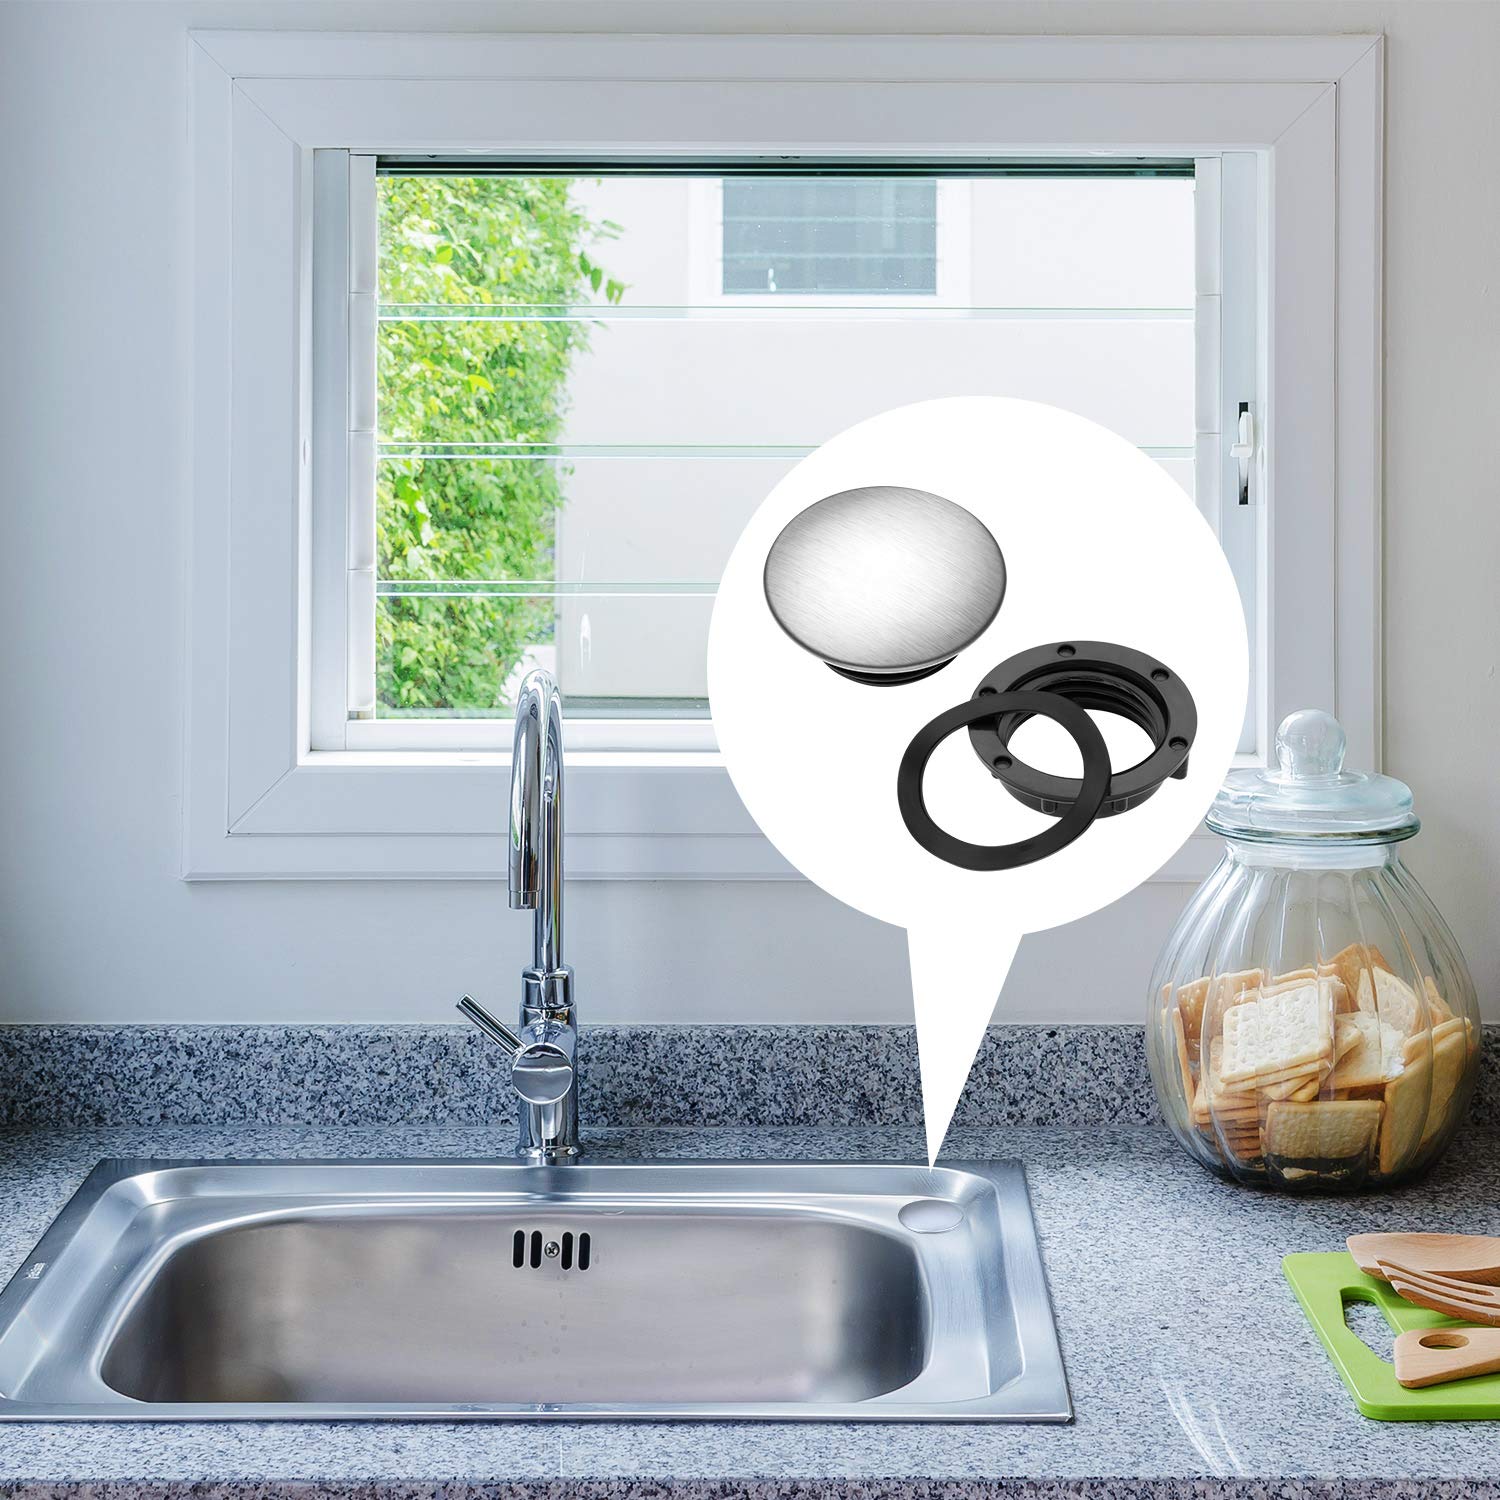 Tatuo Sink Hole Plug Sink Tap Hole Cover Kitchen Faucet Hole Cover Stainless Steel, 2 Packs (1.1 to 1.7 Inch in Diameter)